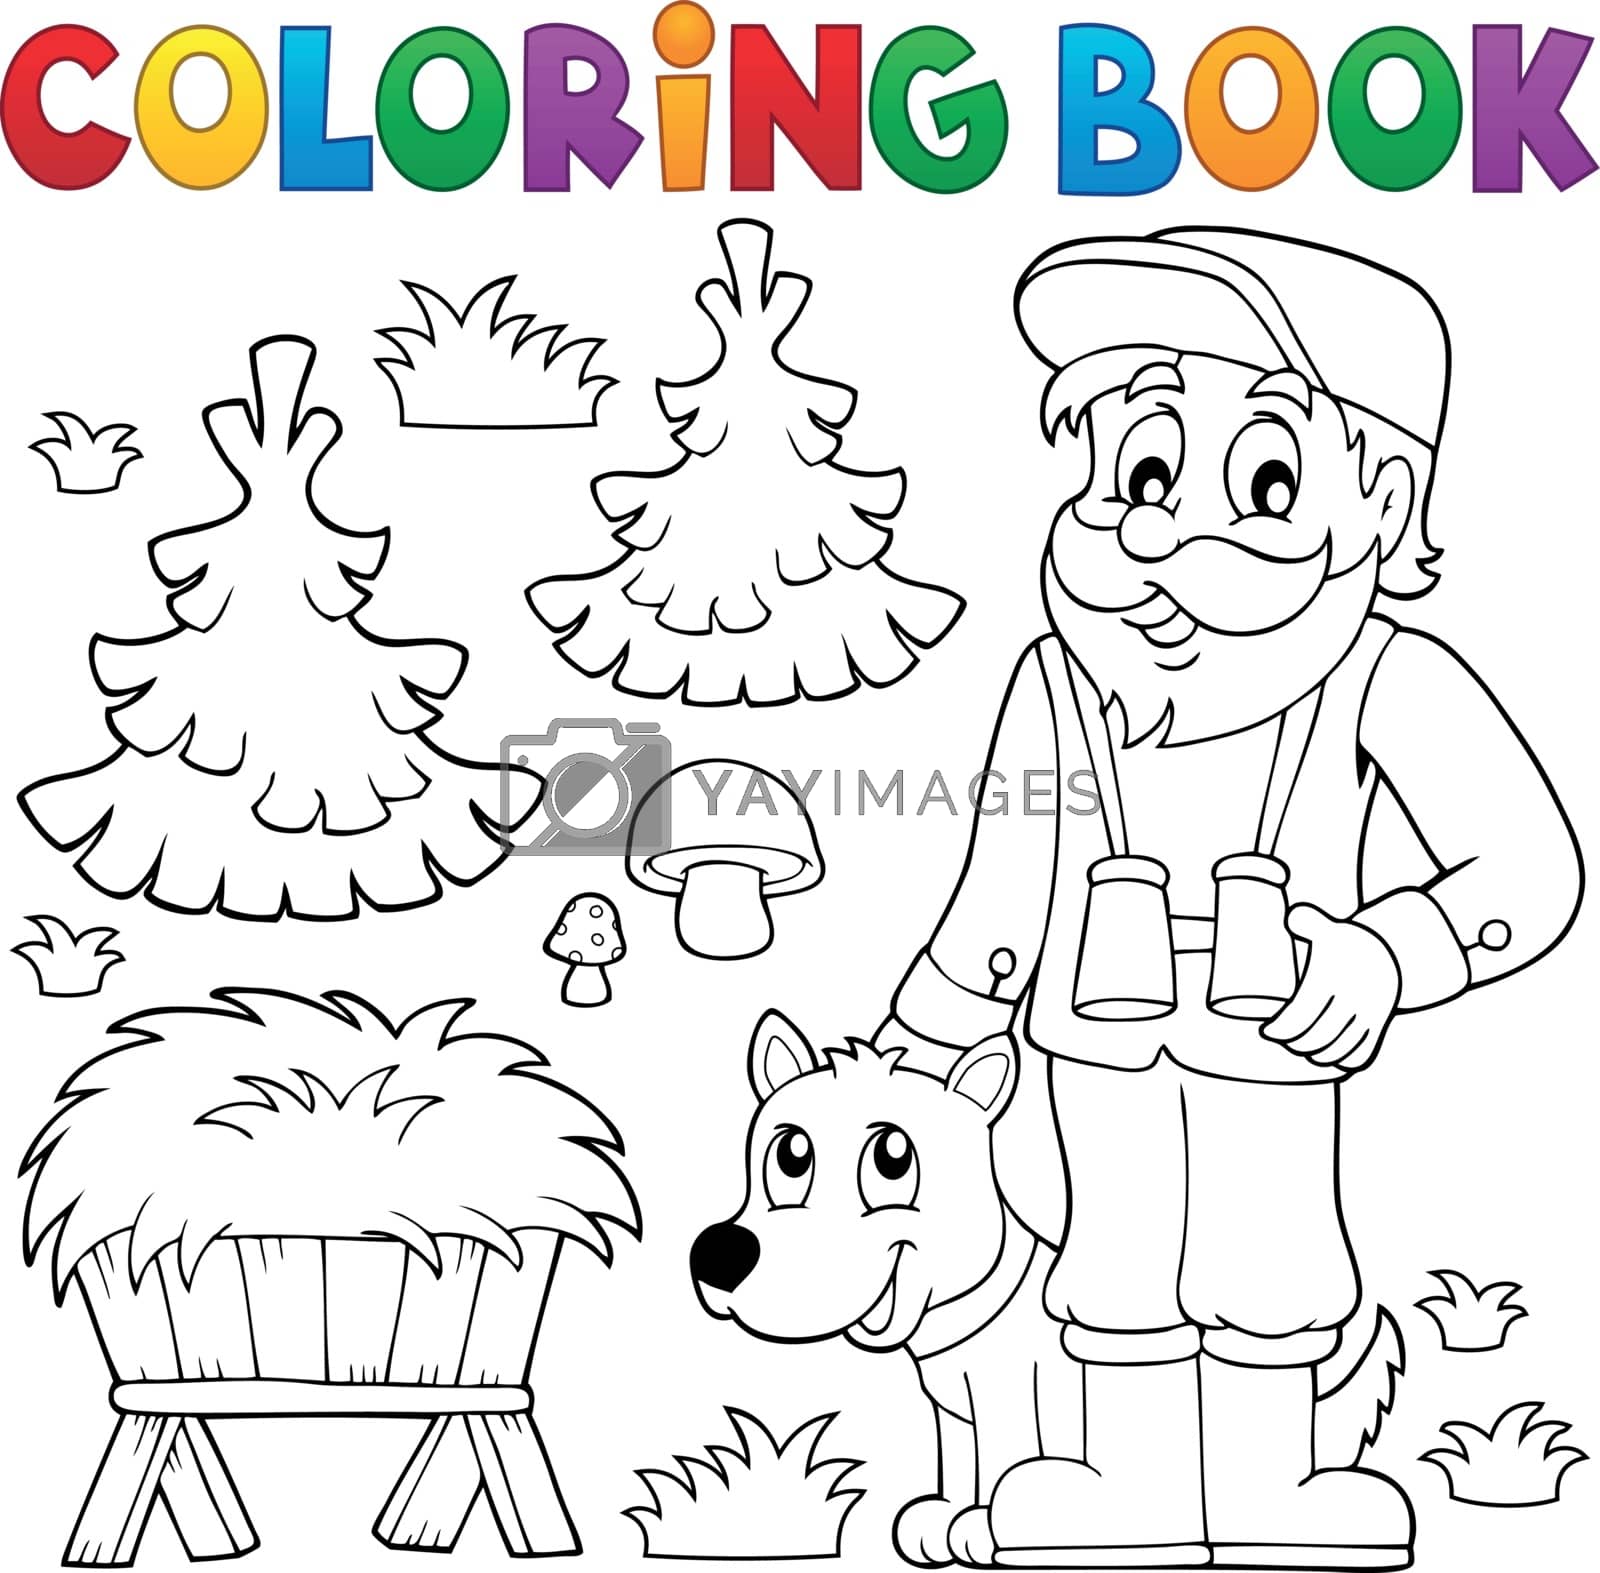 Royalty free image of Coloring book forester theme 2 by clairev